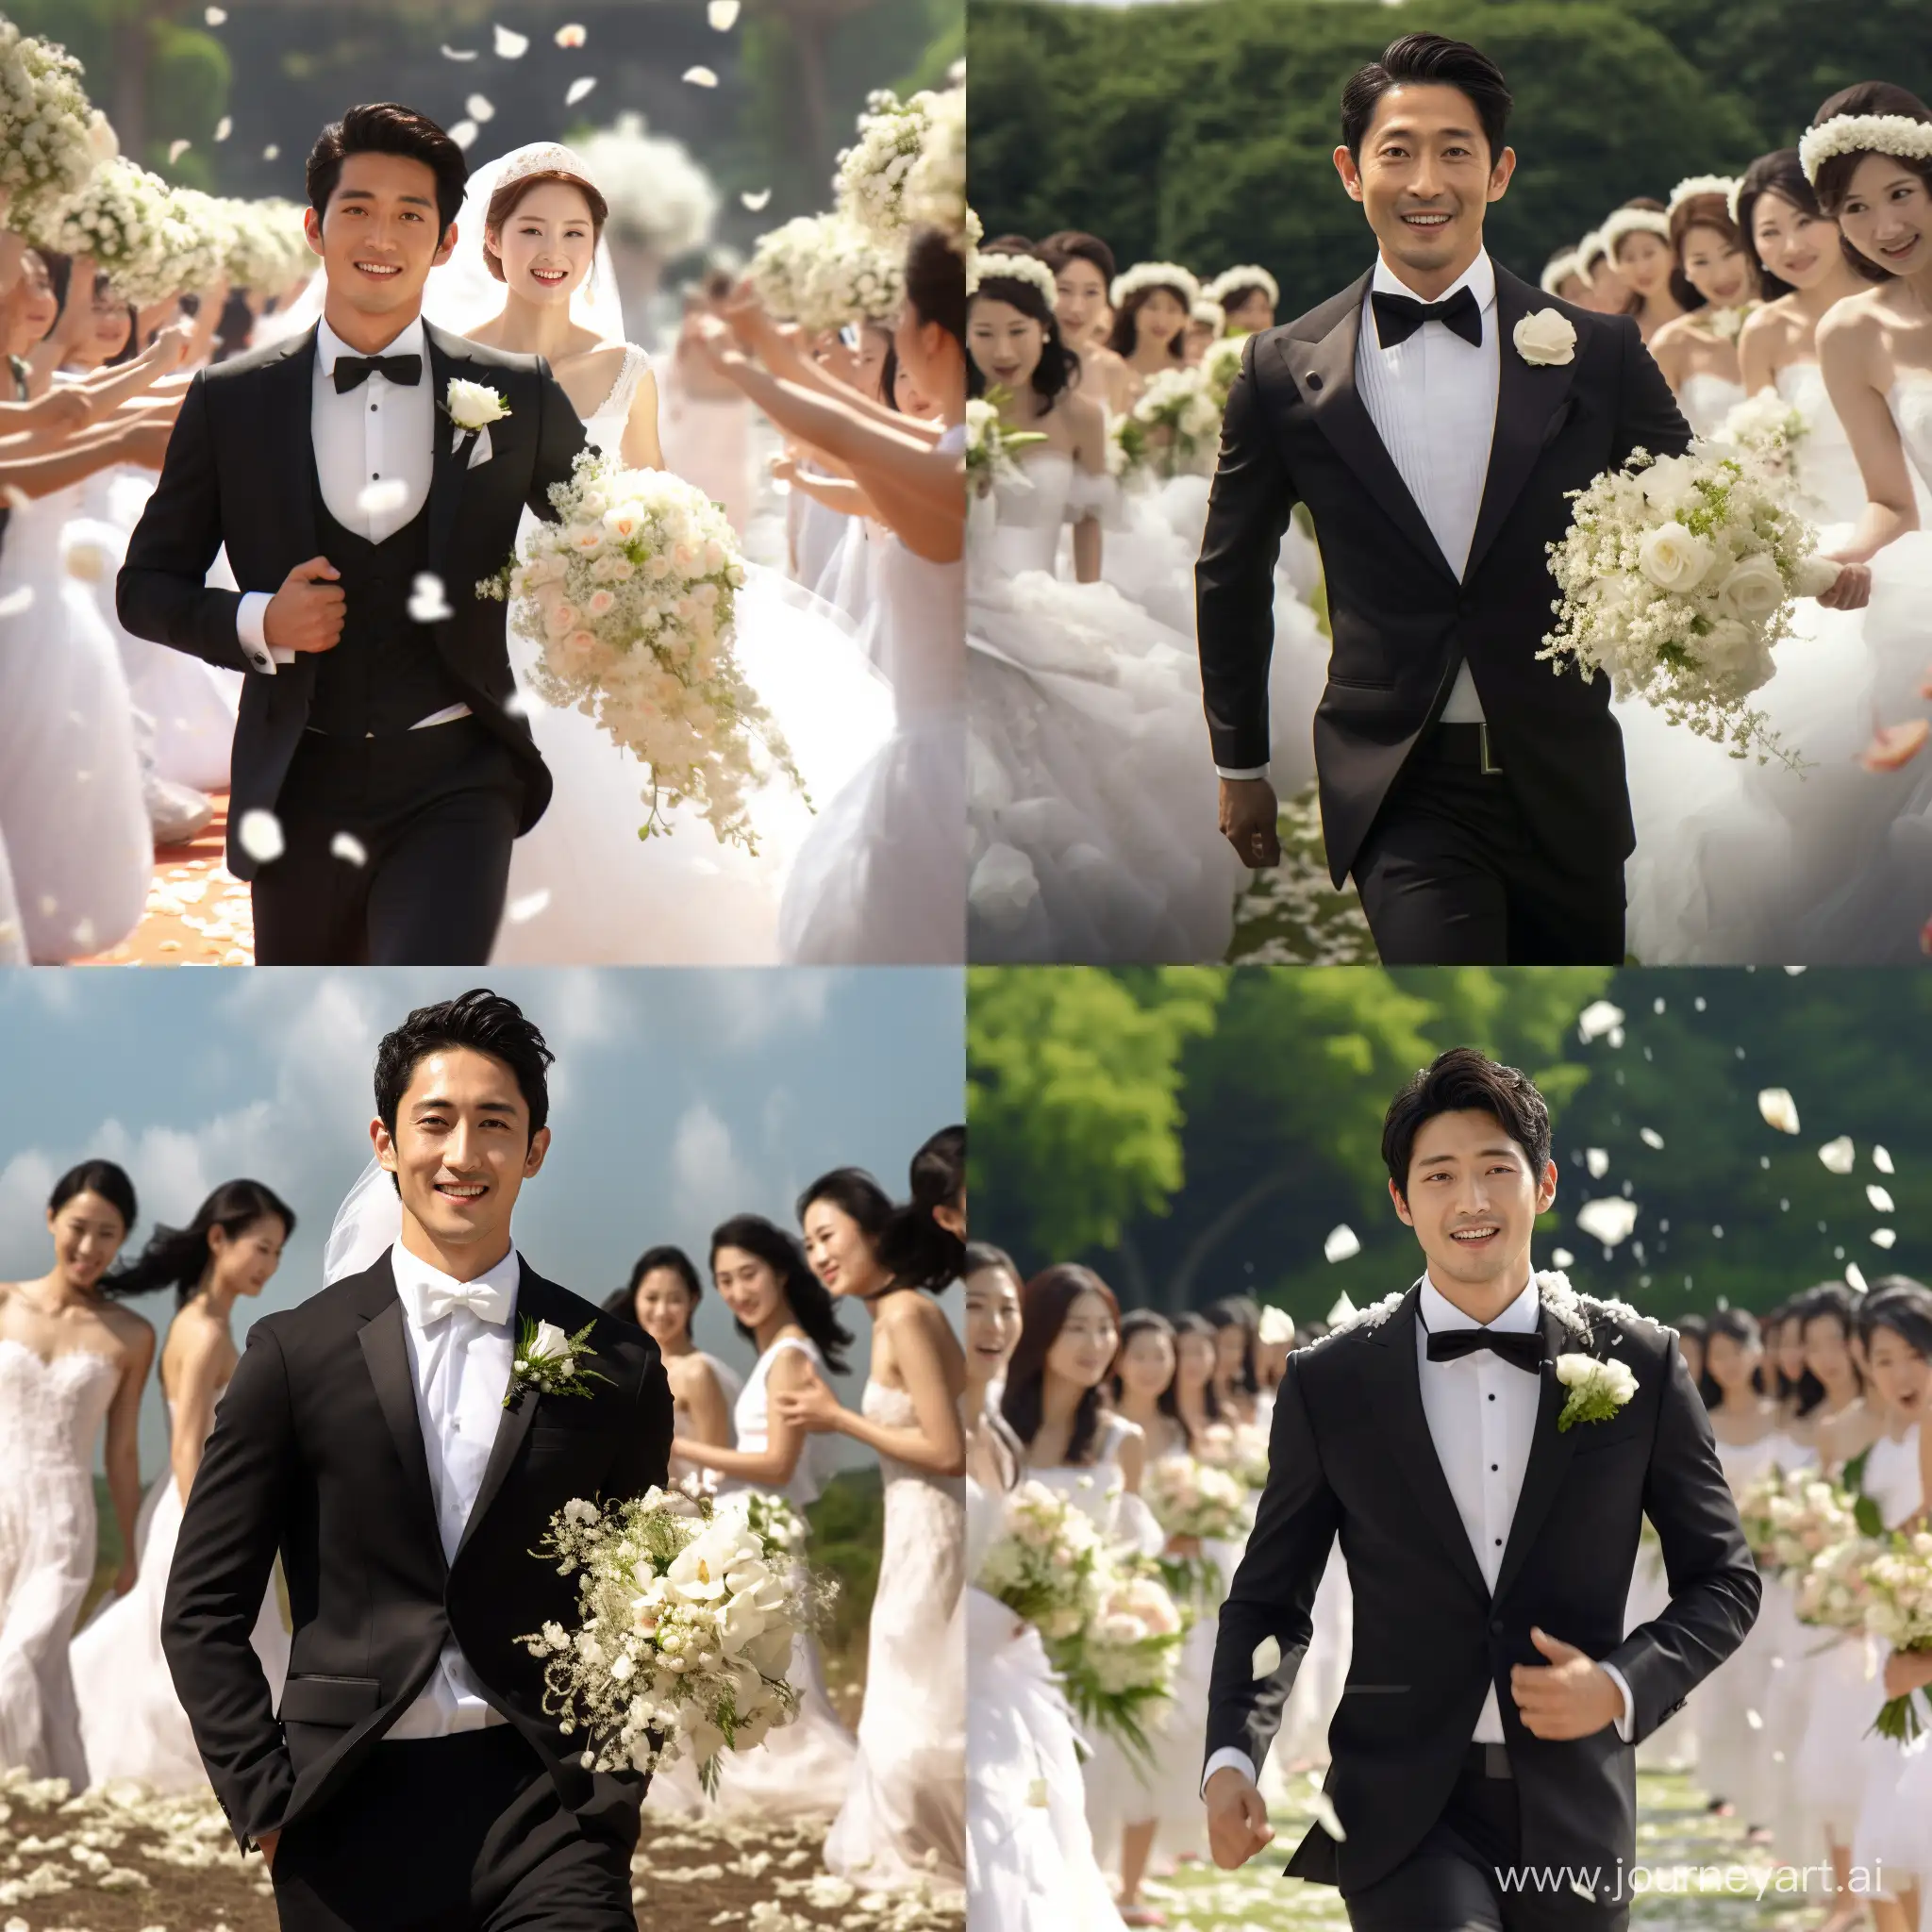 The groom - a typical Japanese man in a sleek black wedding suit, holding a bouquet of flowers in his hand, running away from a crowd of European-looking brides in white wedding dresses. (best quality,4k,8k,highres,masterpiece:1.2), ultra-detailed, (realistic,photorealistic,photo-realistic:1.37), studio lighting, vivid colors, sharp focus, physically-based rendering, extreme detail description, professional, portraits, traditional Japanese setting, contrast of black and white attire, fast-paced motion, panic, mix of modern and traditional elements, dramatic lighting, dynamic composition, European architecture in the background, cherry blossom petals in the air, vibrant and saturated red and white colors, moody atmosphere, suspenseful narrative, cinematic style